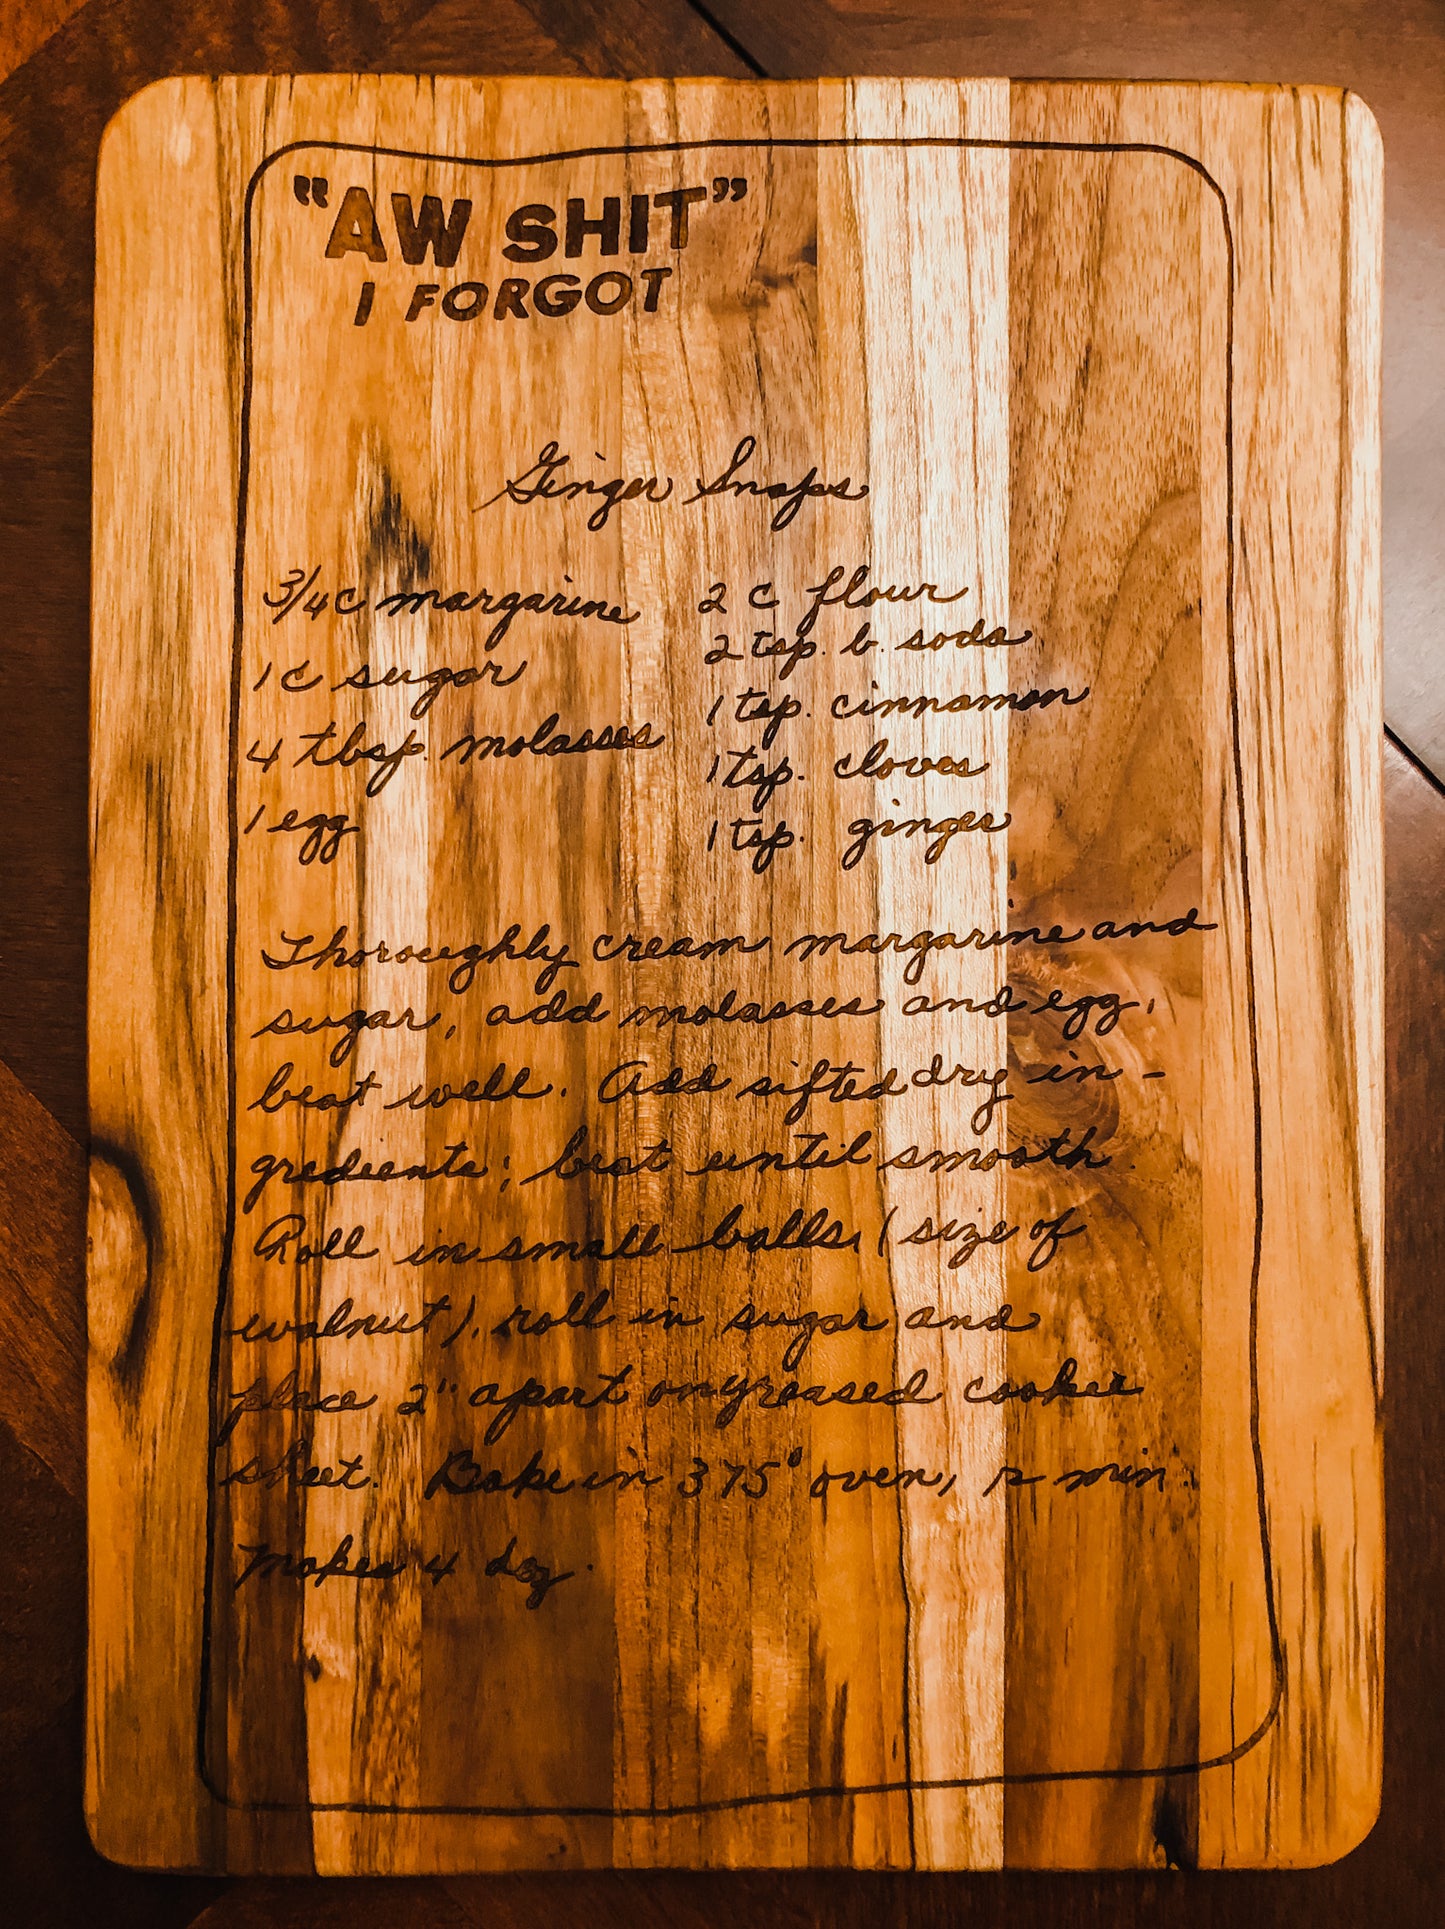 Personalized Engraved Recipe Cutting Board